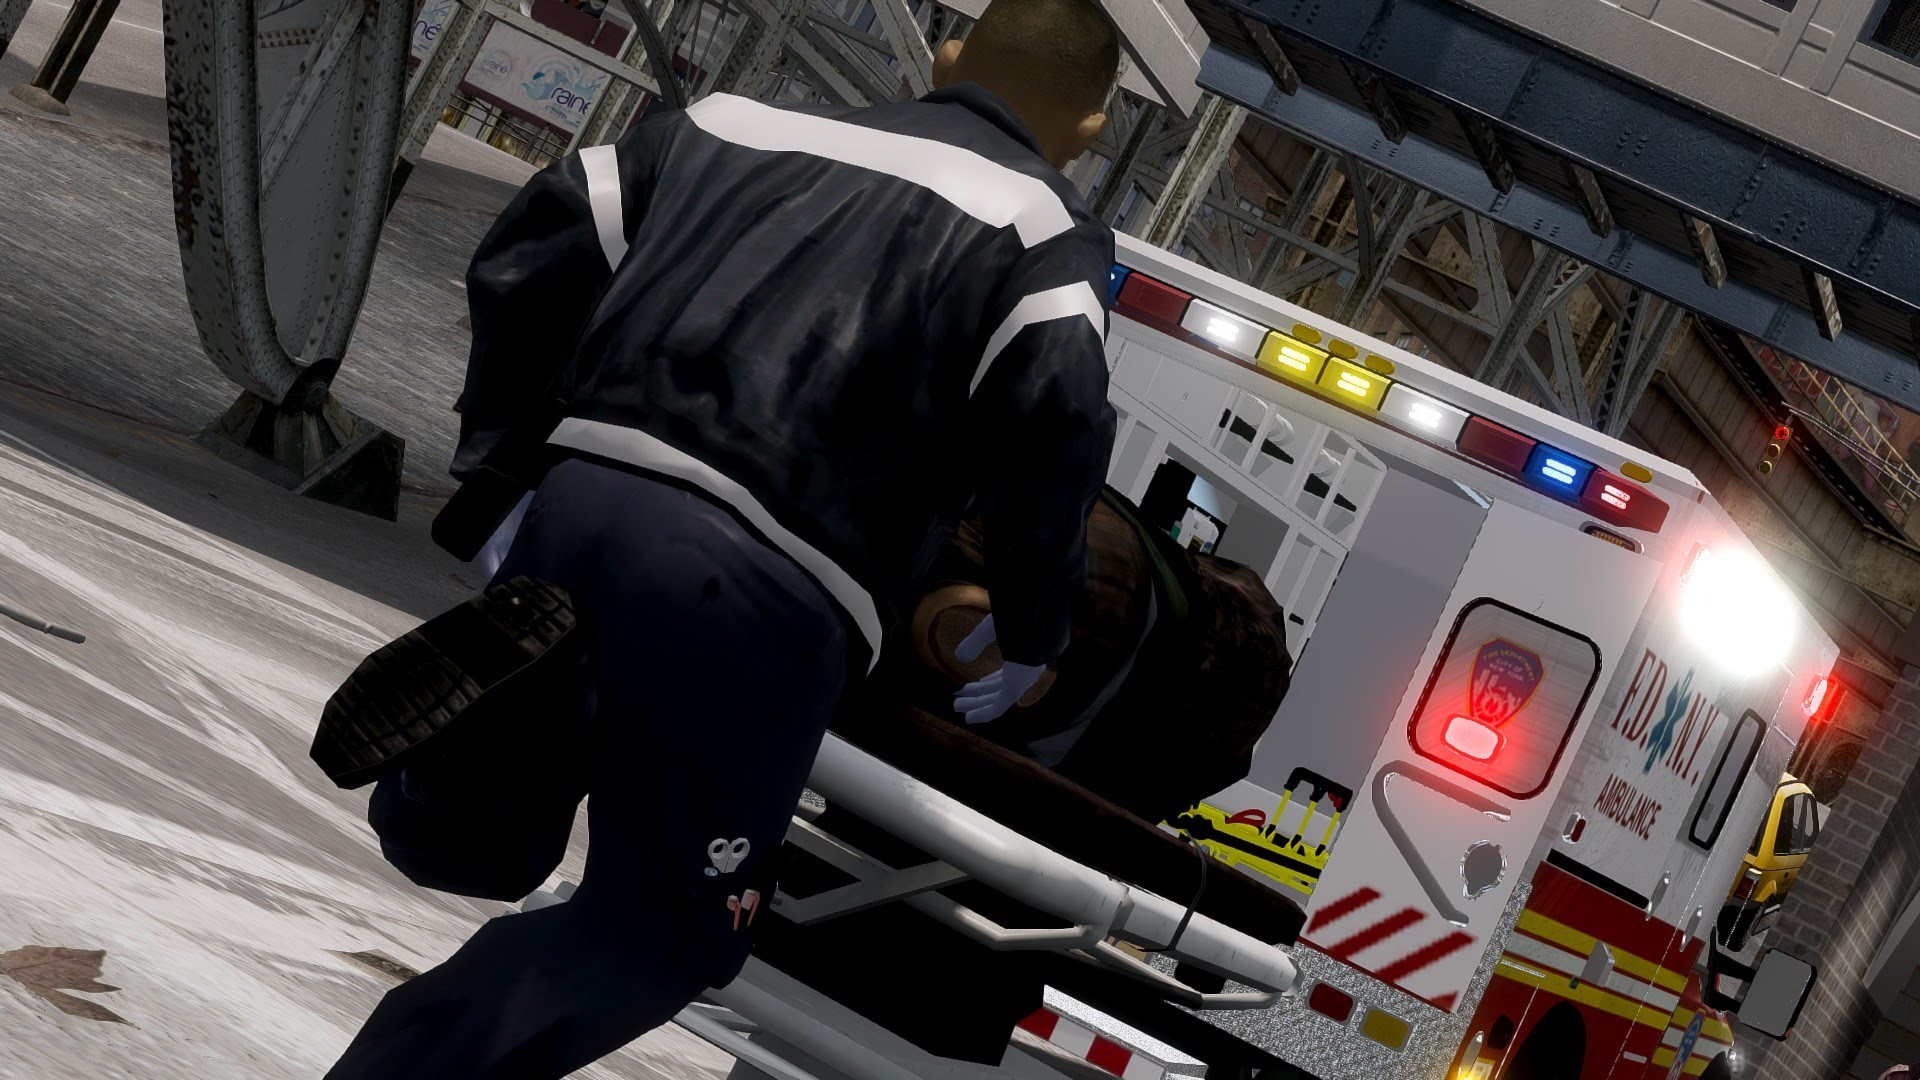 1920x1080 First Look at the Firefighter Mod - Paramedic Call [GTA IV Script Mod] -  YouTube